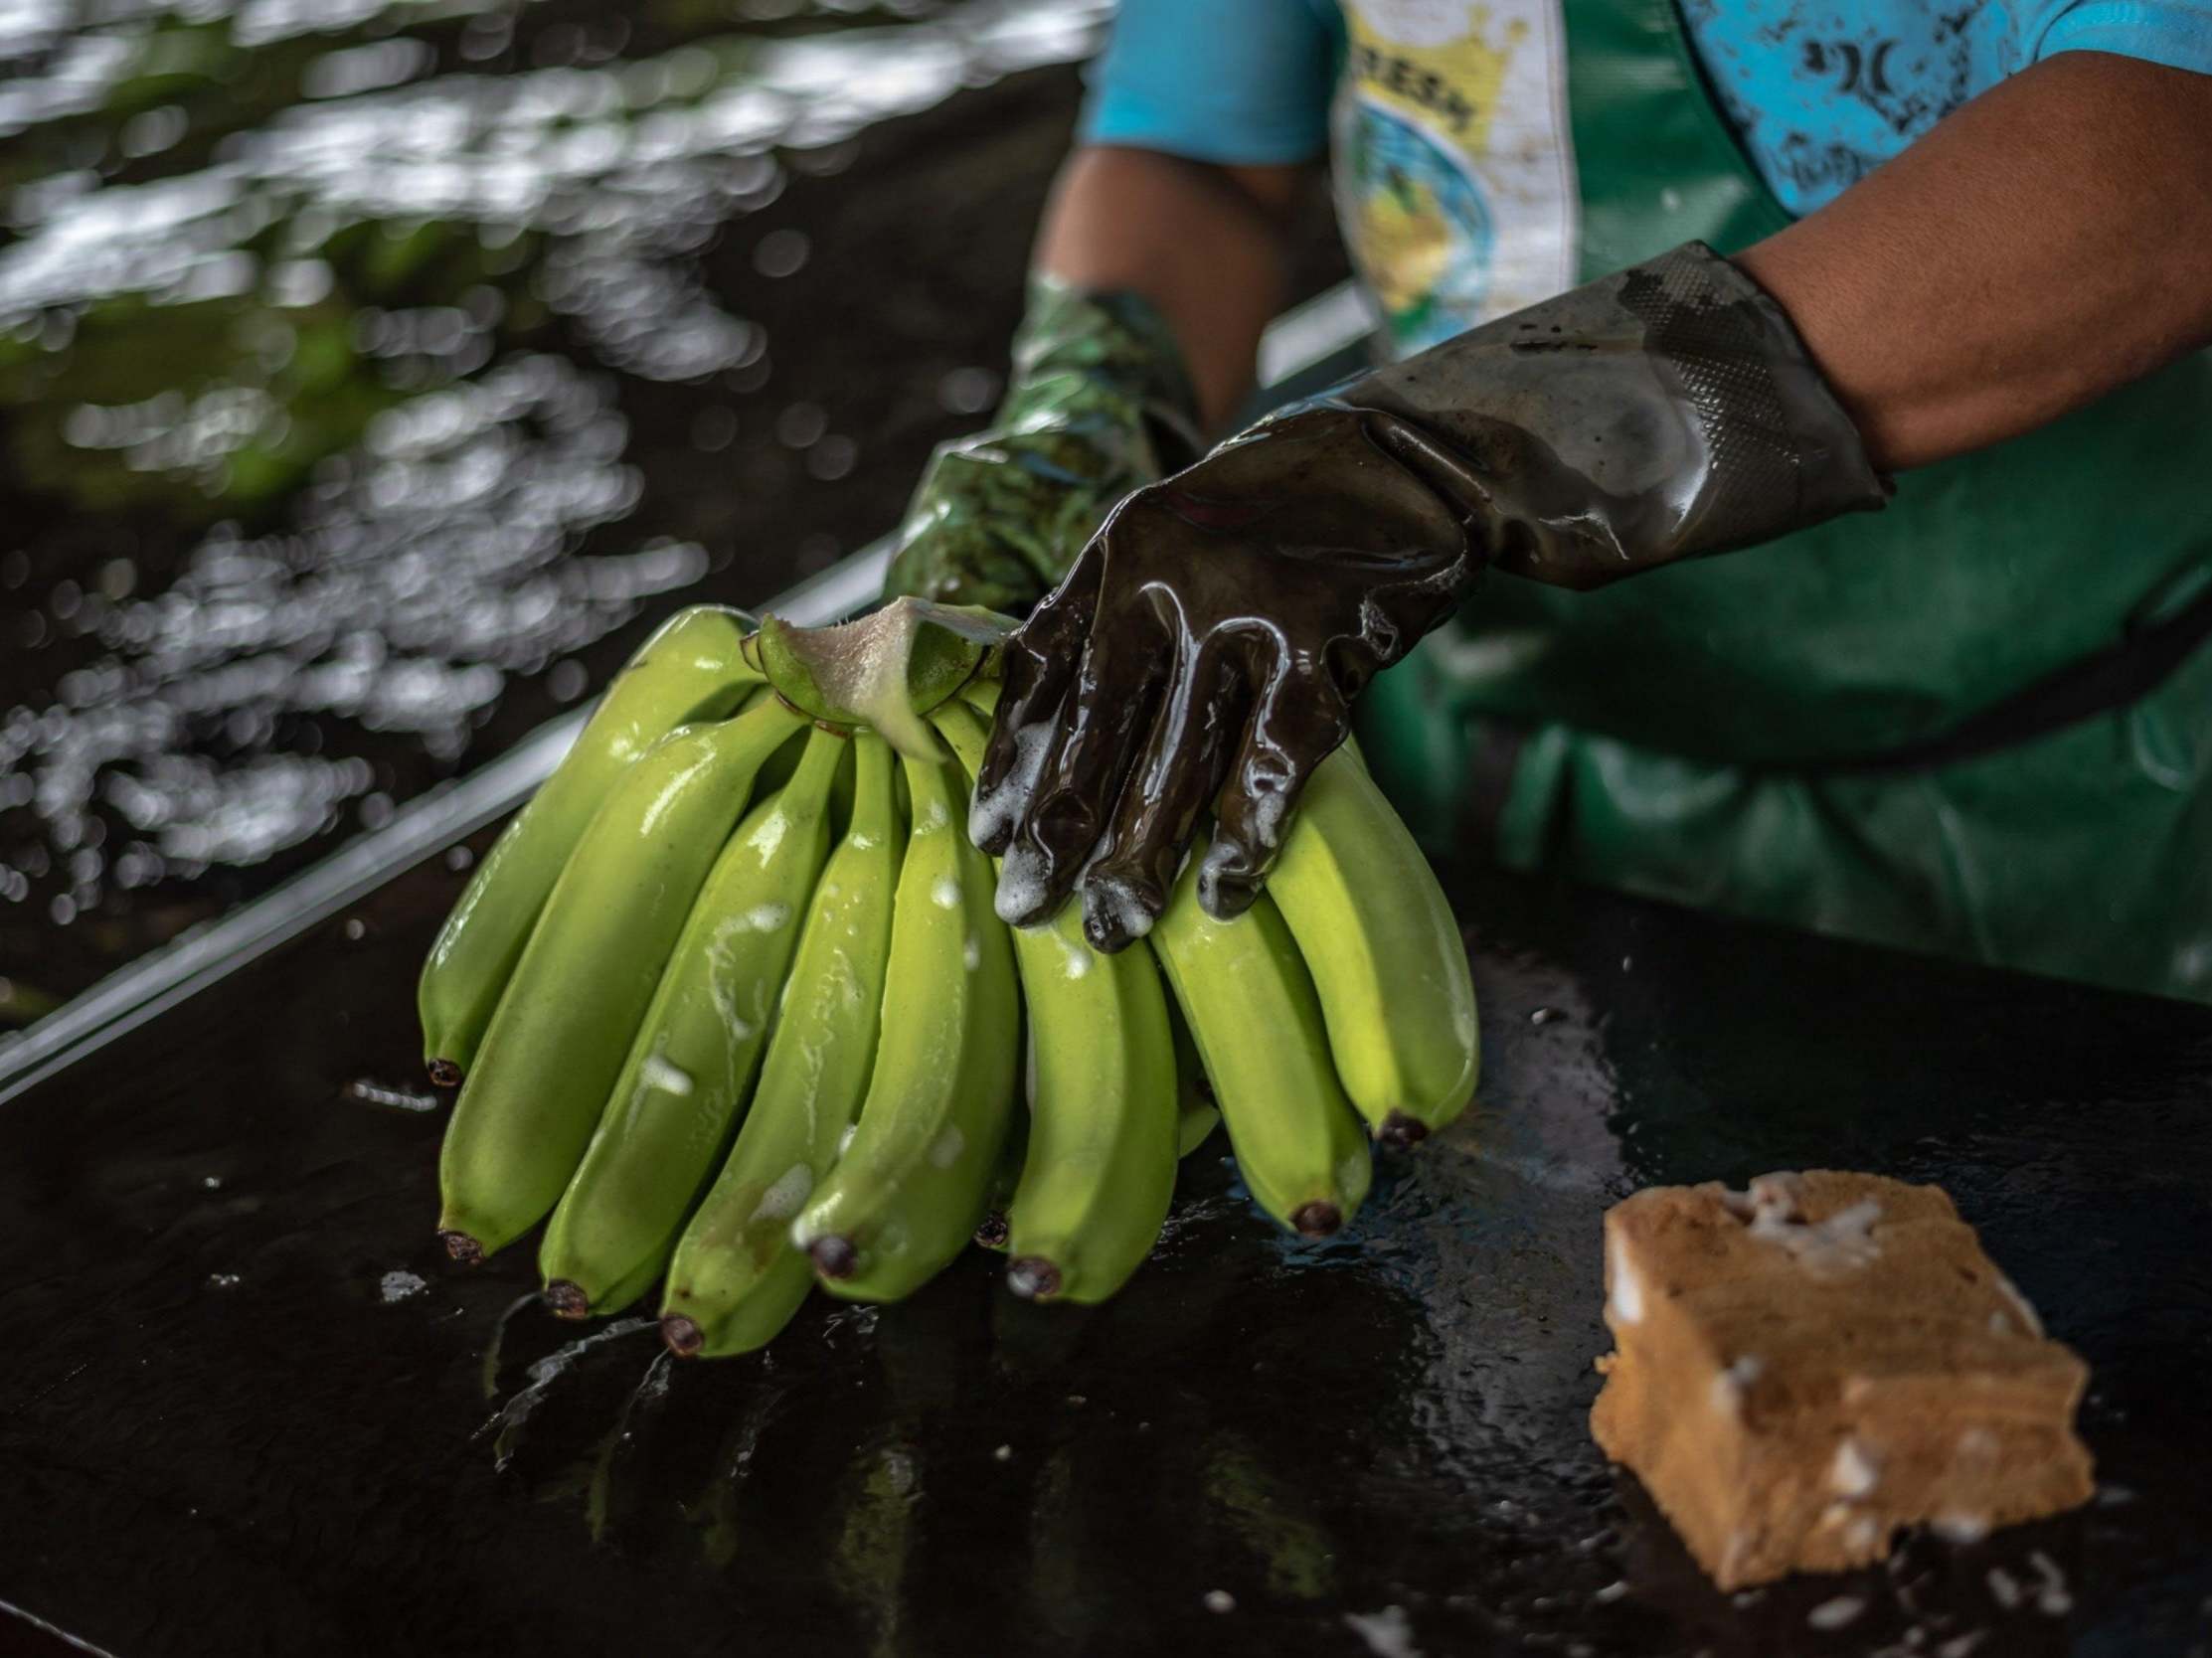 Clean of the crop: bunches of the fruit are hand washed with detergent to remove any insects and residual contamination on a plantation in Milagro, Ecuador